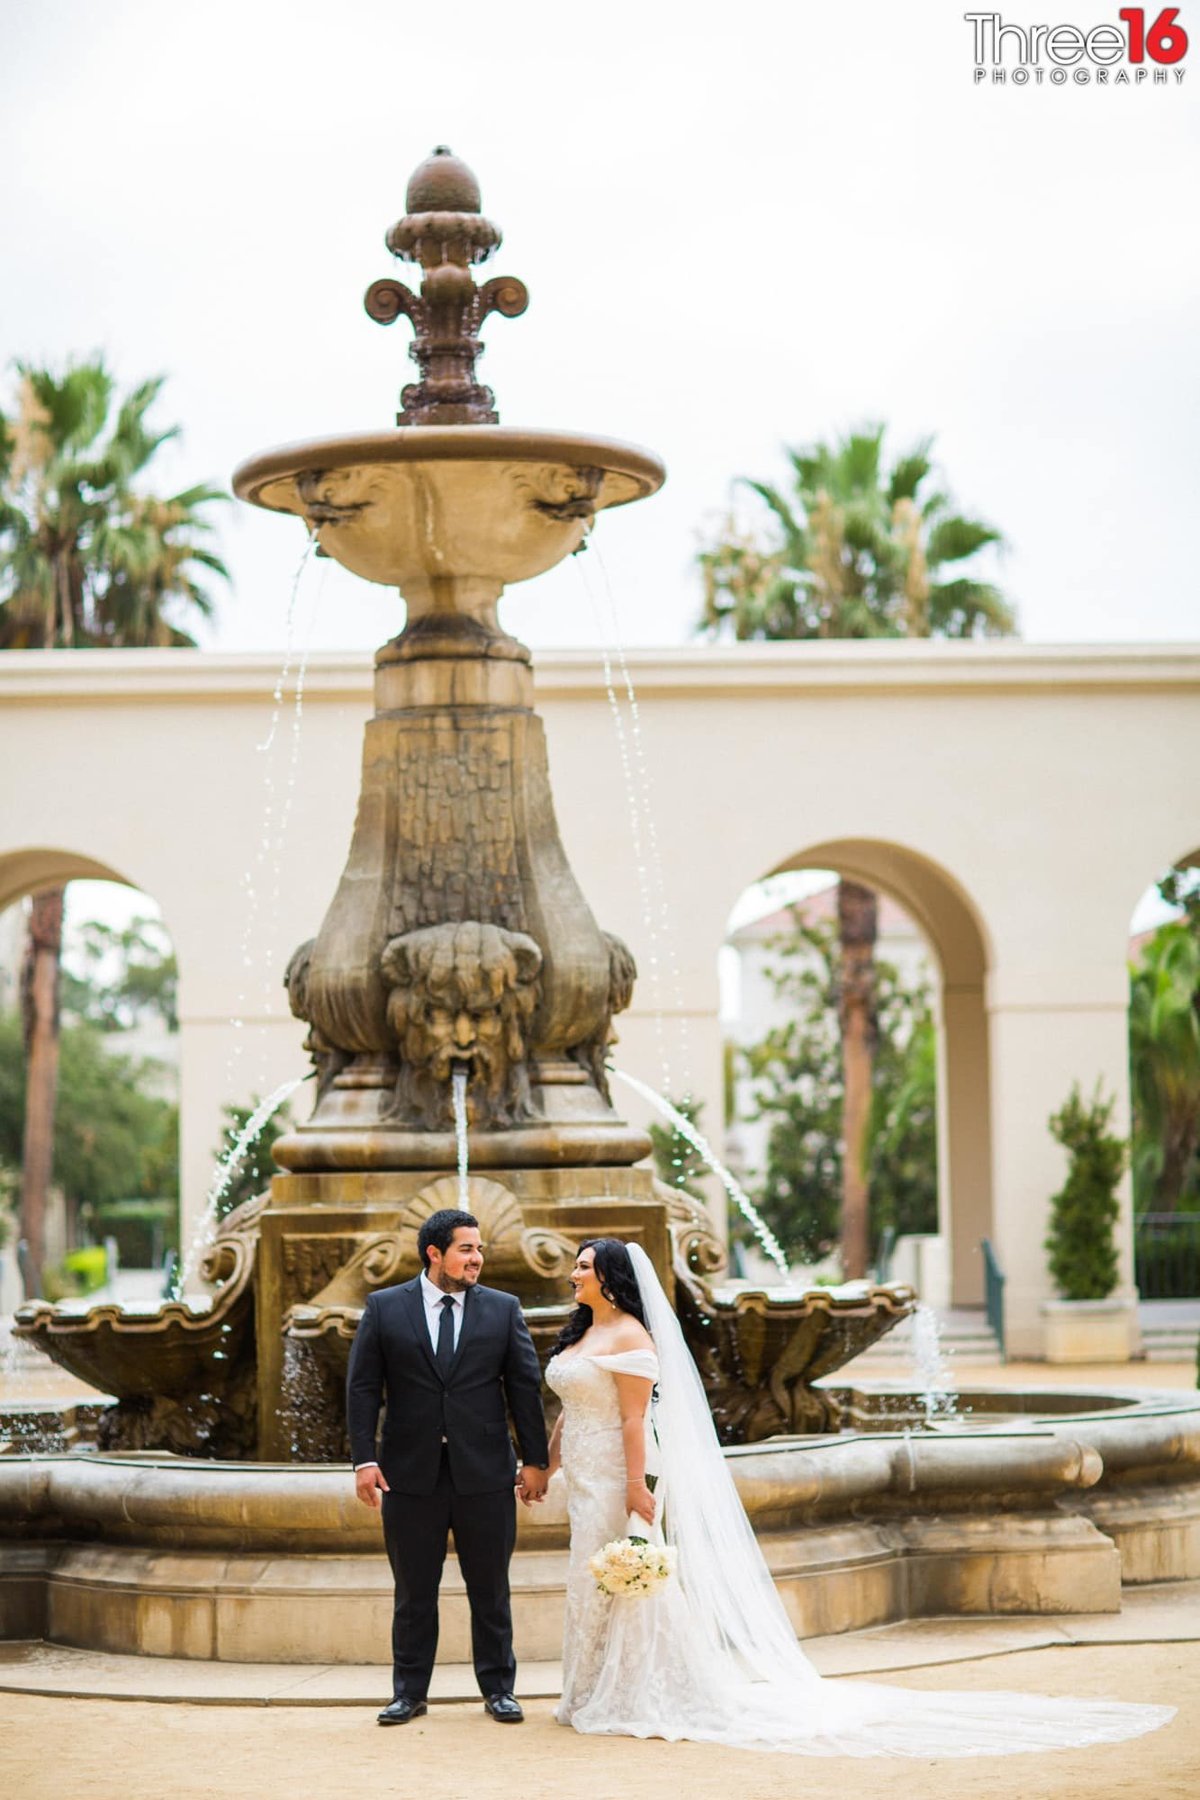 Married couple look at each other while holding hands in front of a large water fountain at the Pasadena City Hall